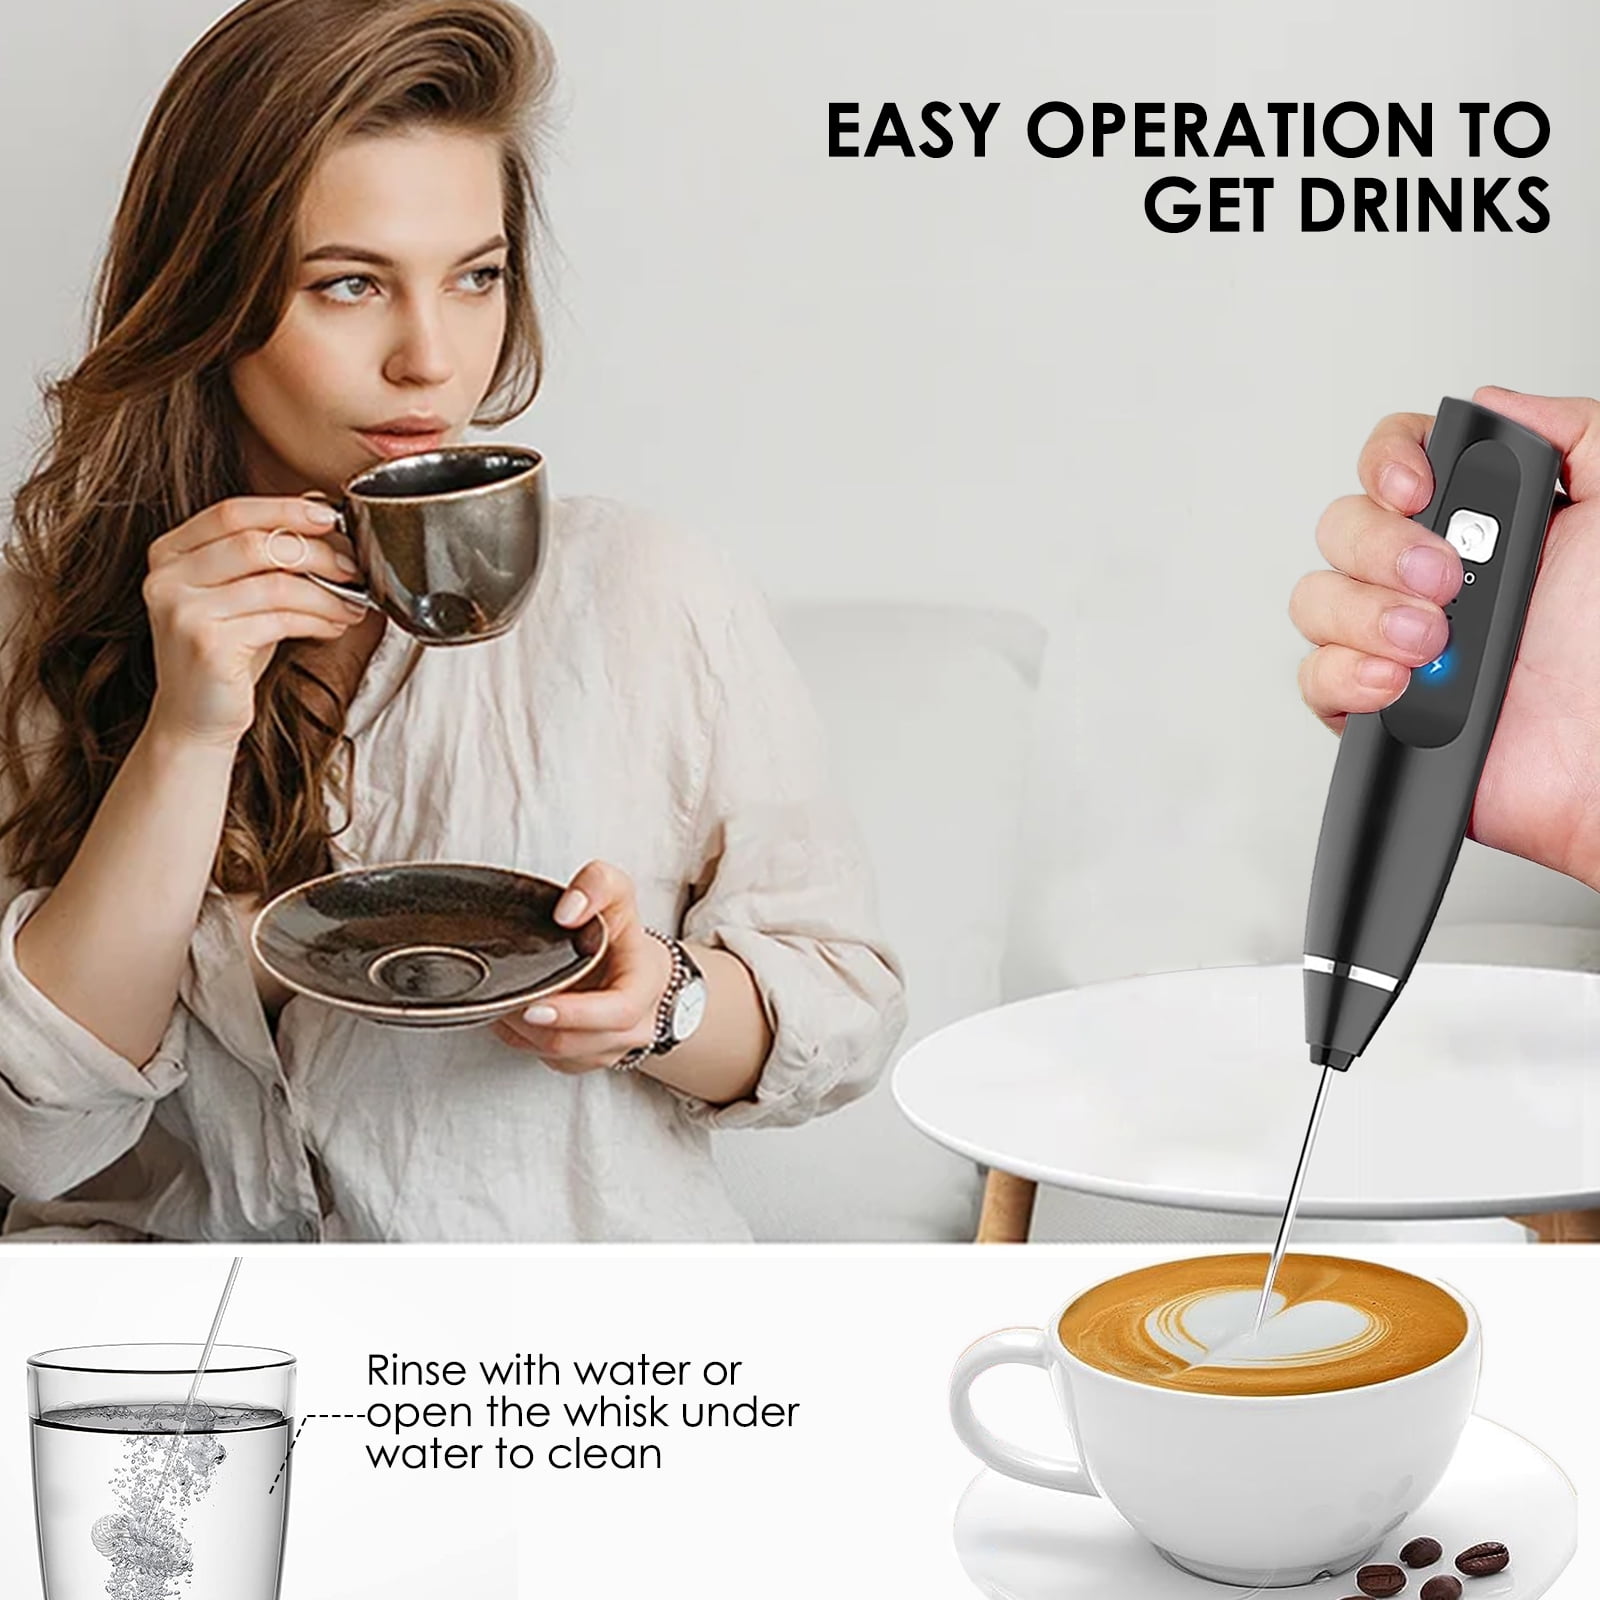  Nahida Handheld Milk Frother for Coffee, Rechargeable Electric  Whisk with 3 Heads 3 Speeds Drink Mixer Foam Maker For Latte, Cappuccino,  Hot Chocolate, Egg - White: Home & Kitchen